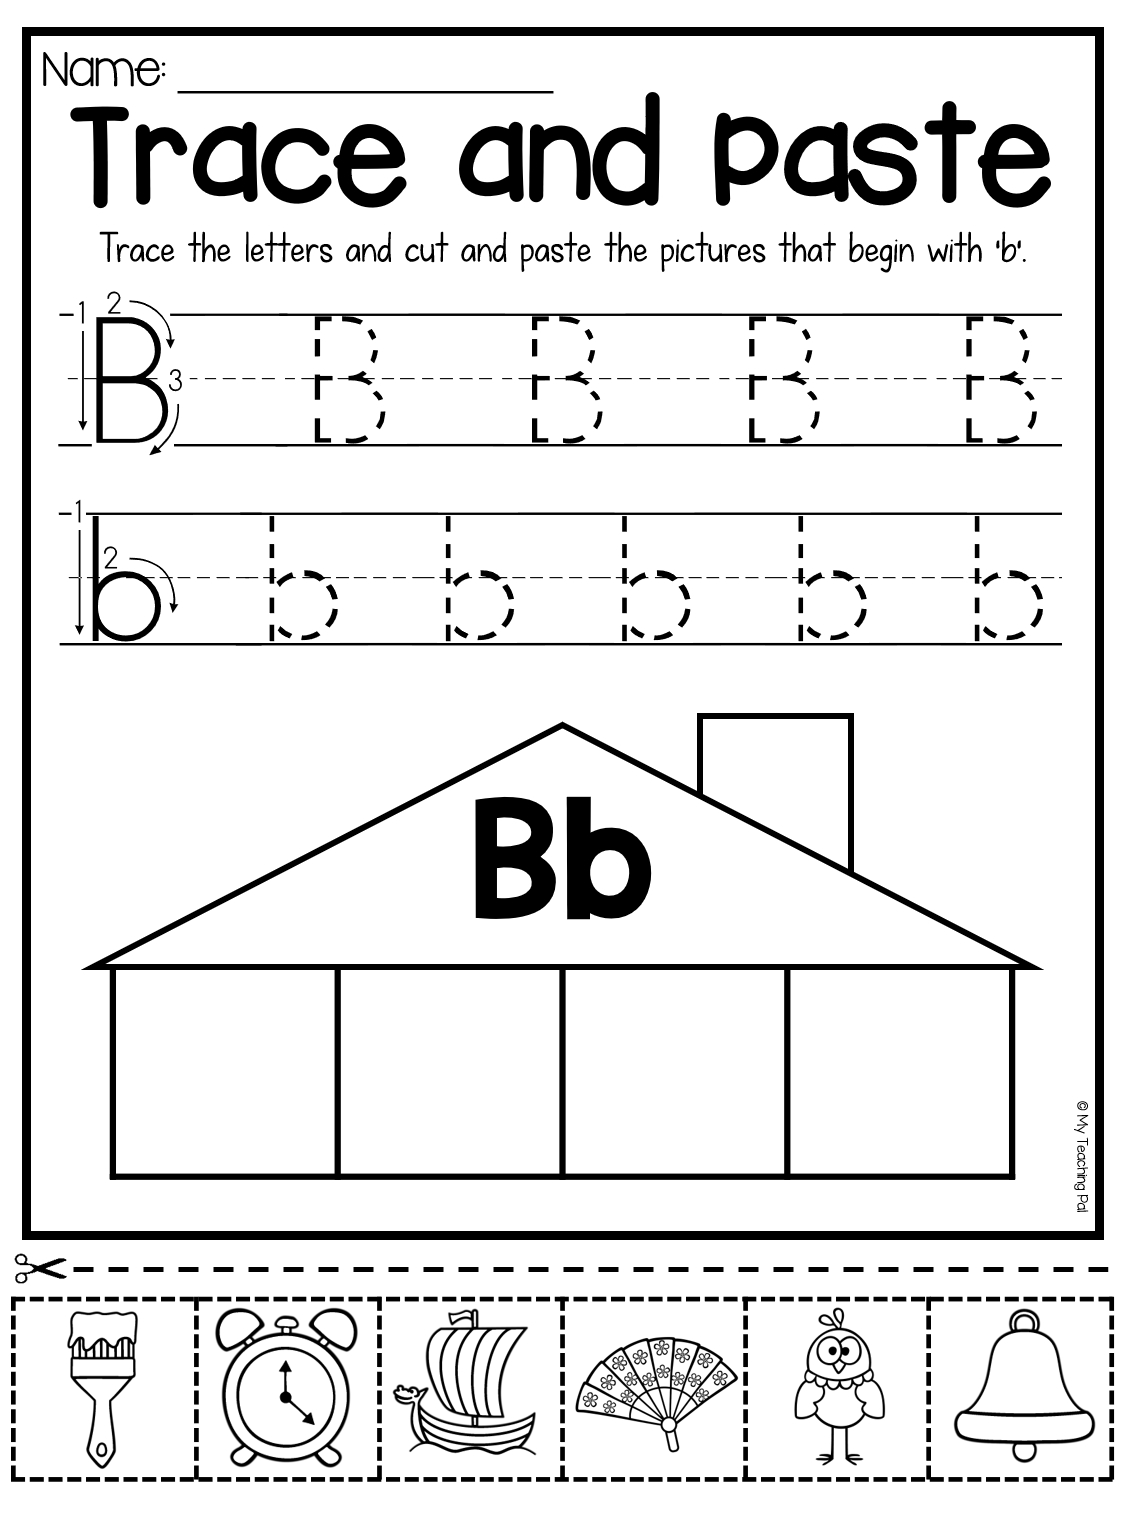 Printable Alphabet Worksheets Clip Cards Matching Game Of Beginning Letter Sound A B C For 